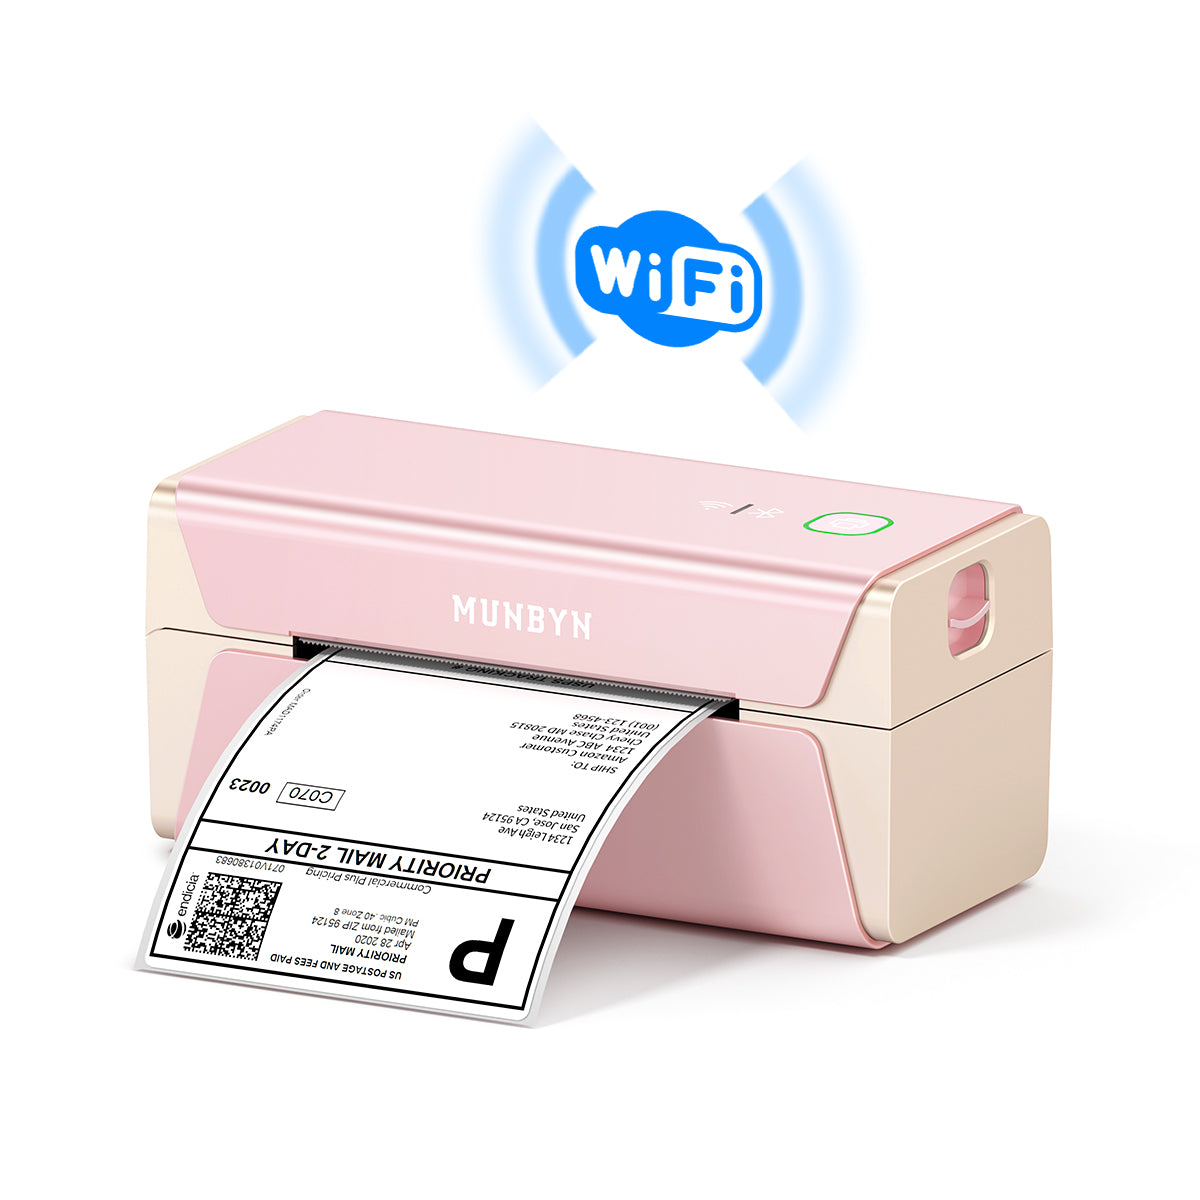 MUNBYN RW401 AirPrint Thermal Printer is a high-quality, multi-functional printing solution that caters to all your needs.